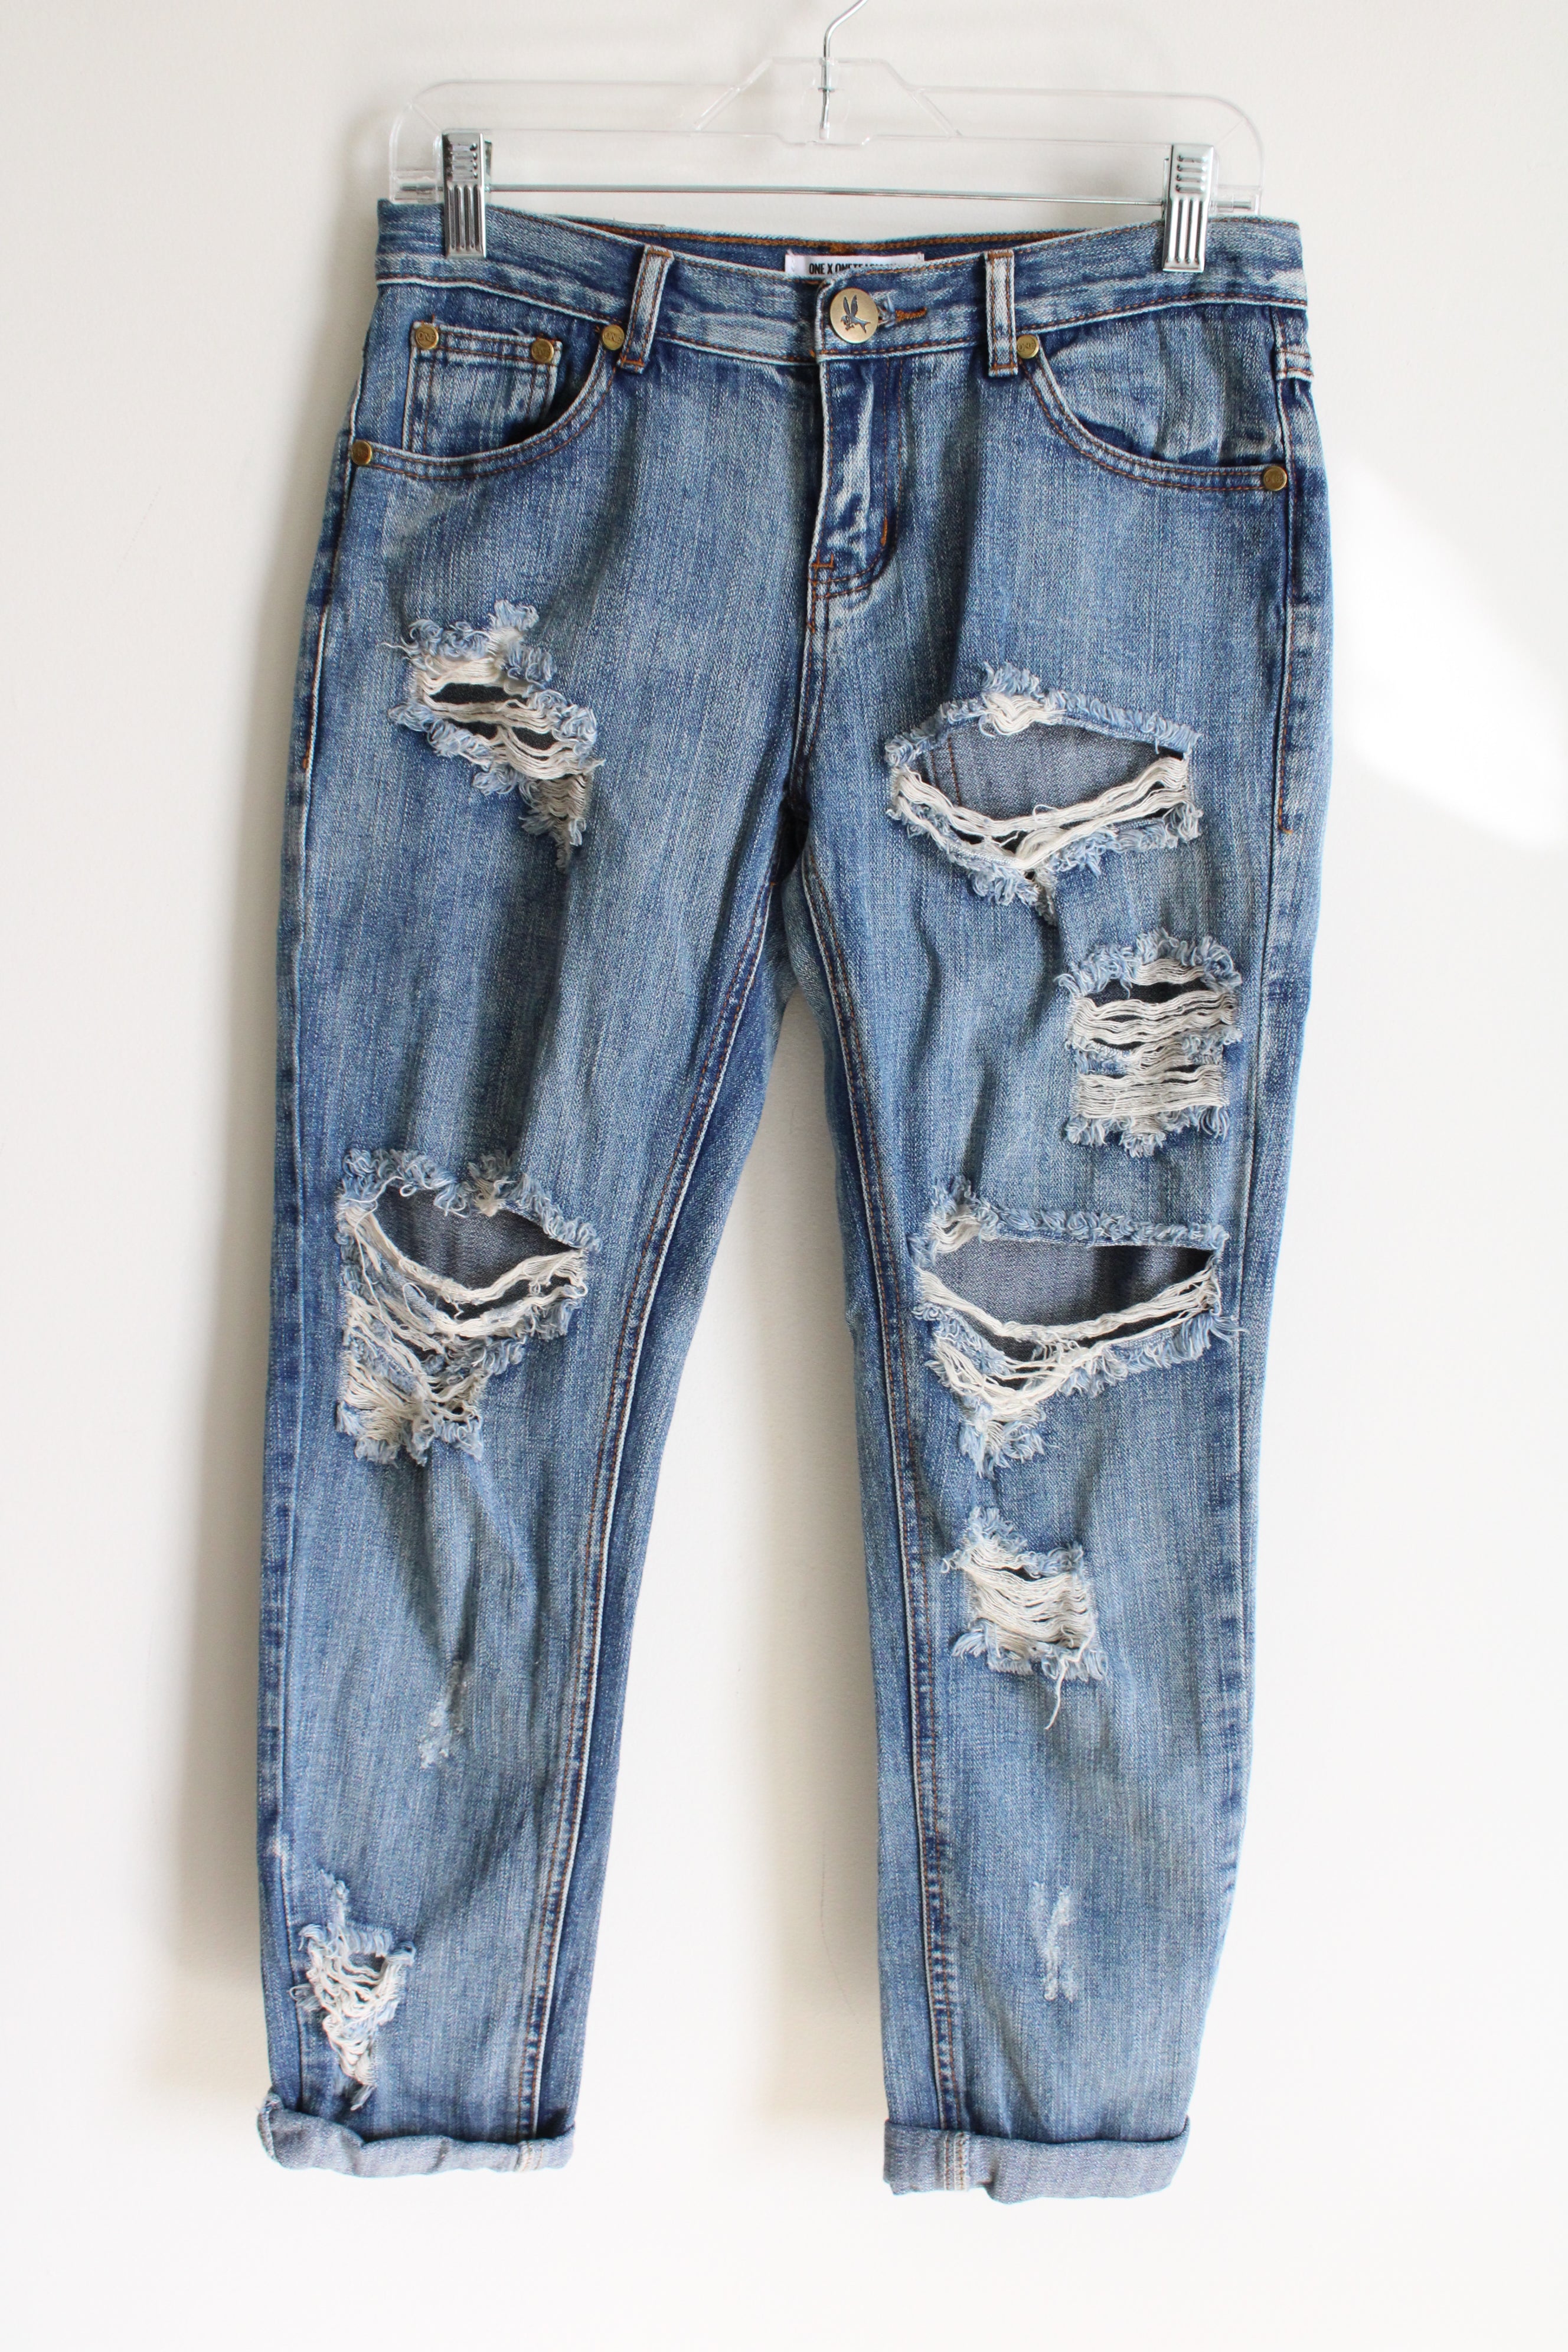 One X OneTeaspoon Distressed Awesome Baggies Low Waist Medium Rise Relaxed Leg Tapered Rolled Cuff Jeans | 24 (0)